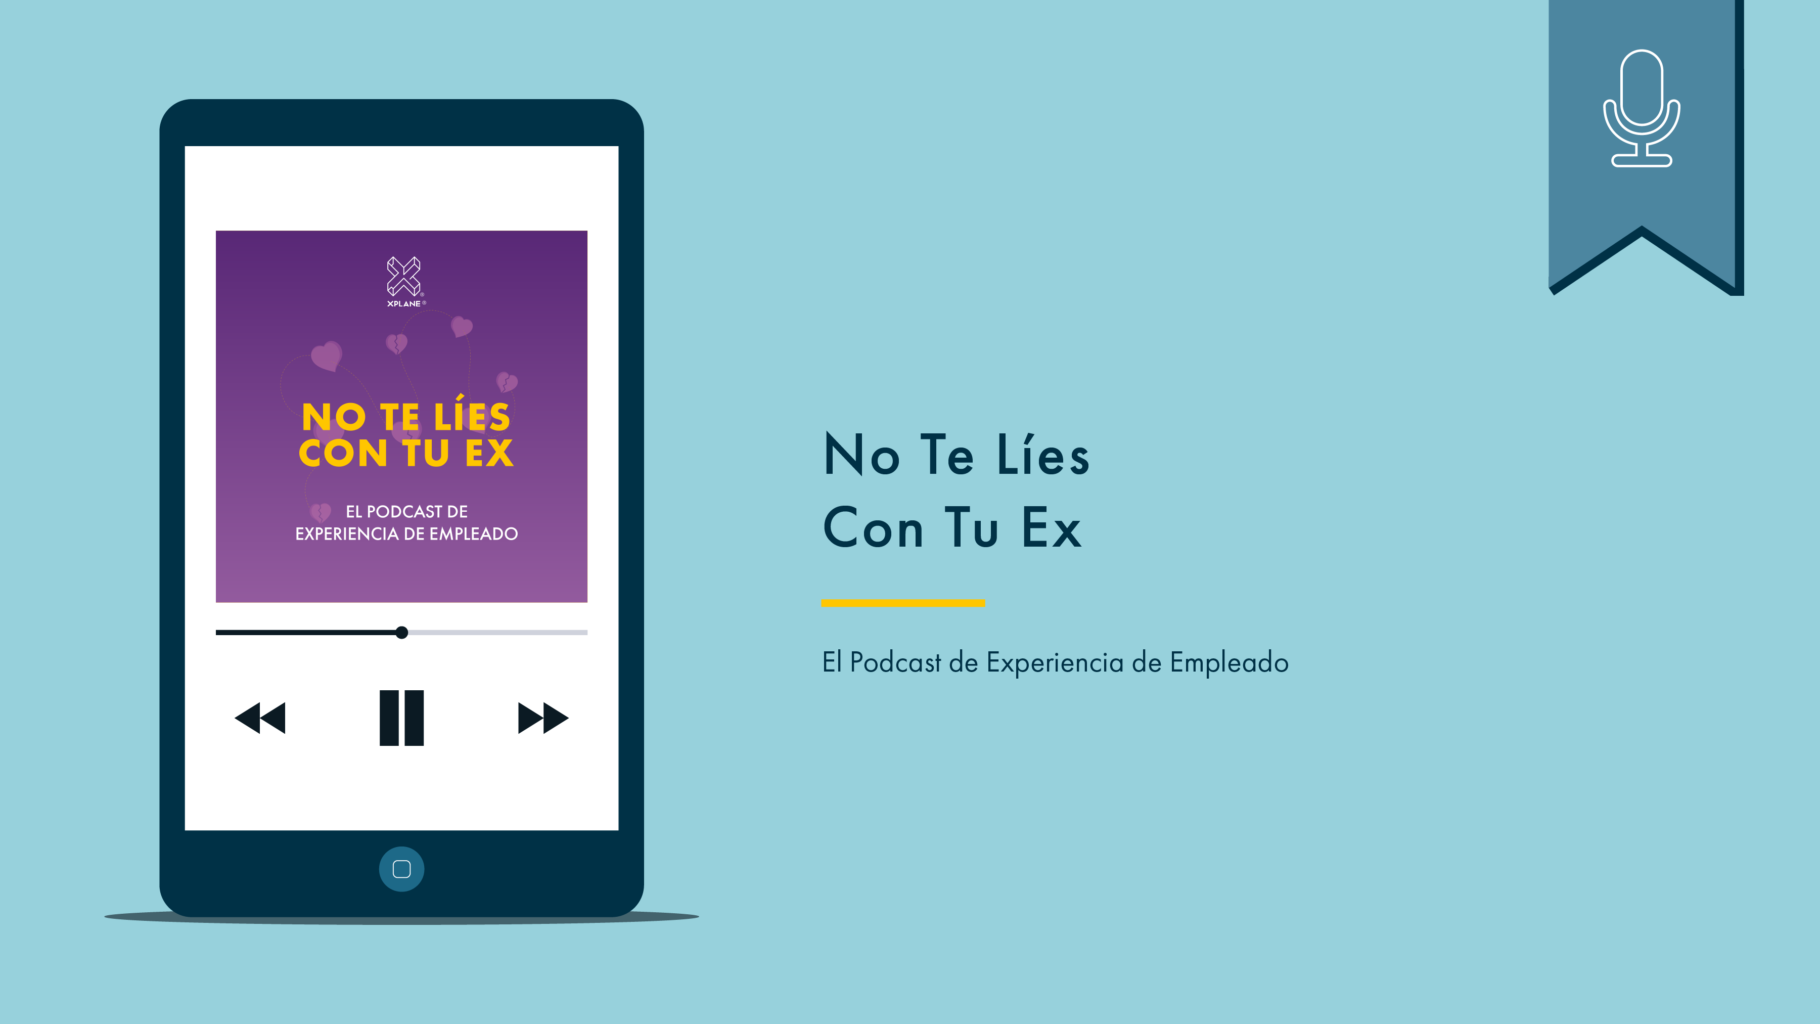 Phone with podcast artwork on the left. On the right reads “No Te Líes Con Tu Ex, El Podcast de Experience de Empleado.” Above is a blue flag with a white icon denoting that this is a podcast.